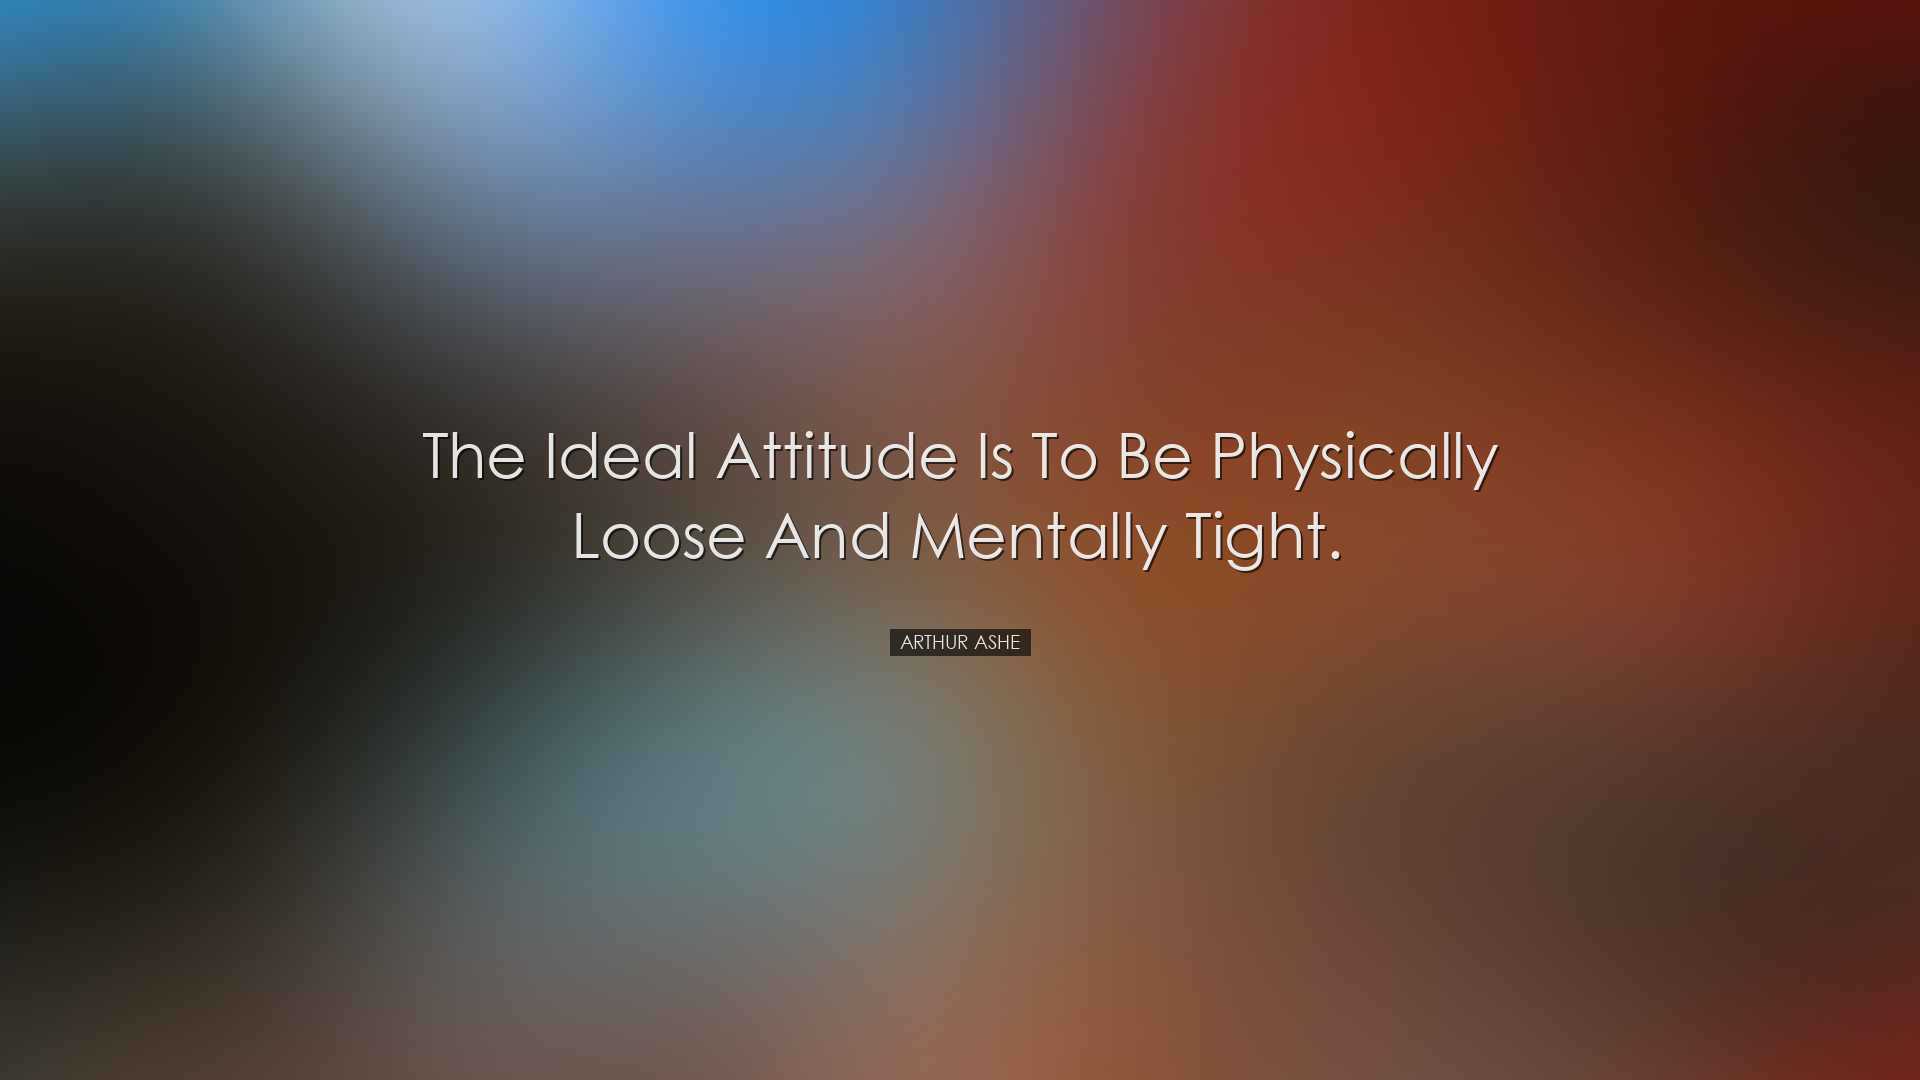 The ideal attitude is to be physically loose and mentally tight. -